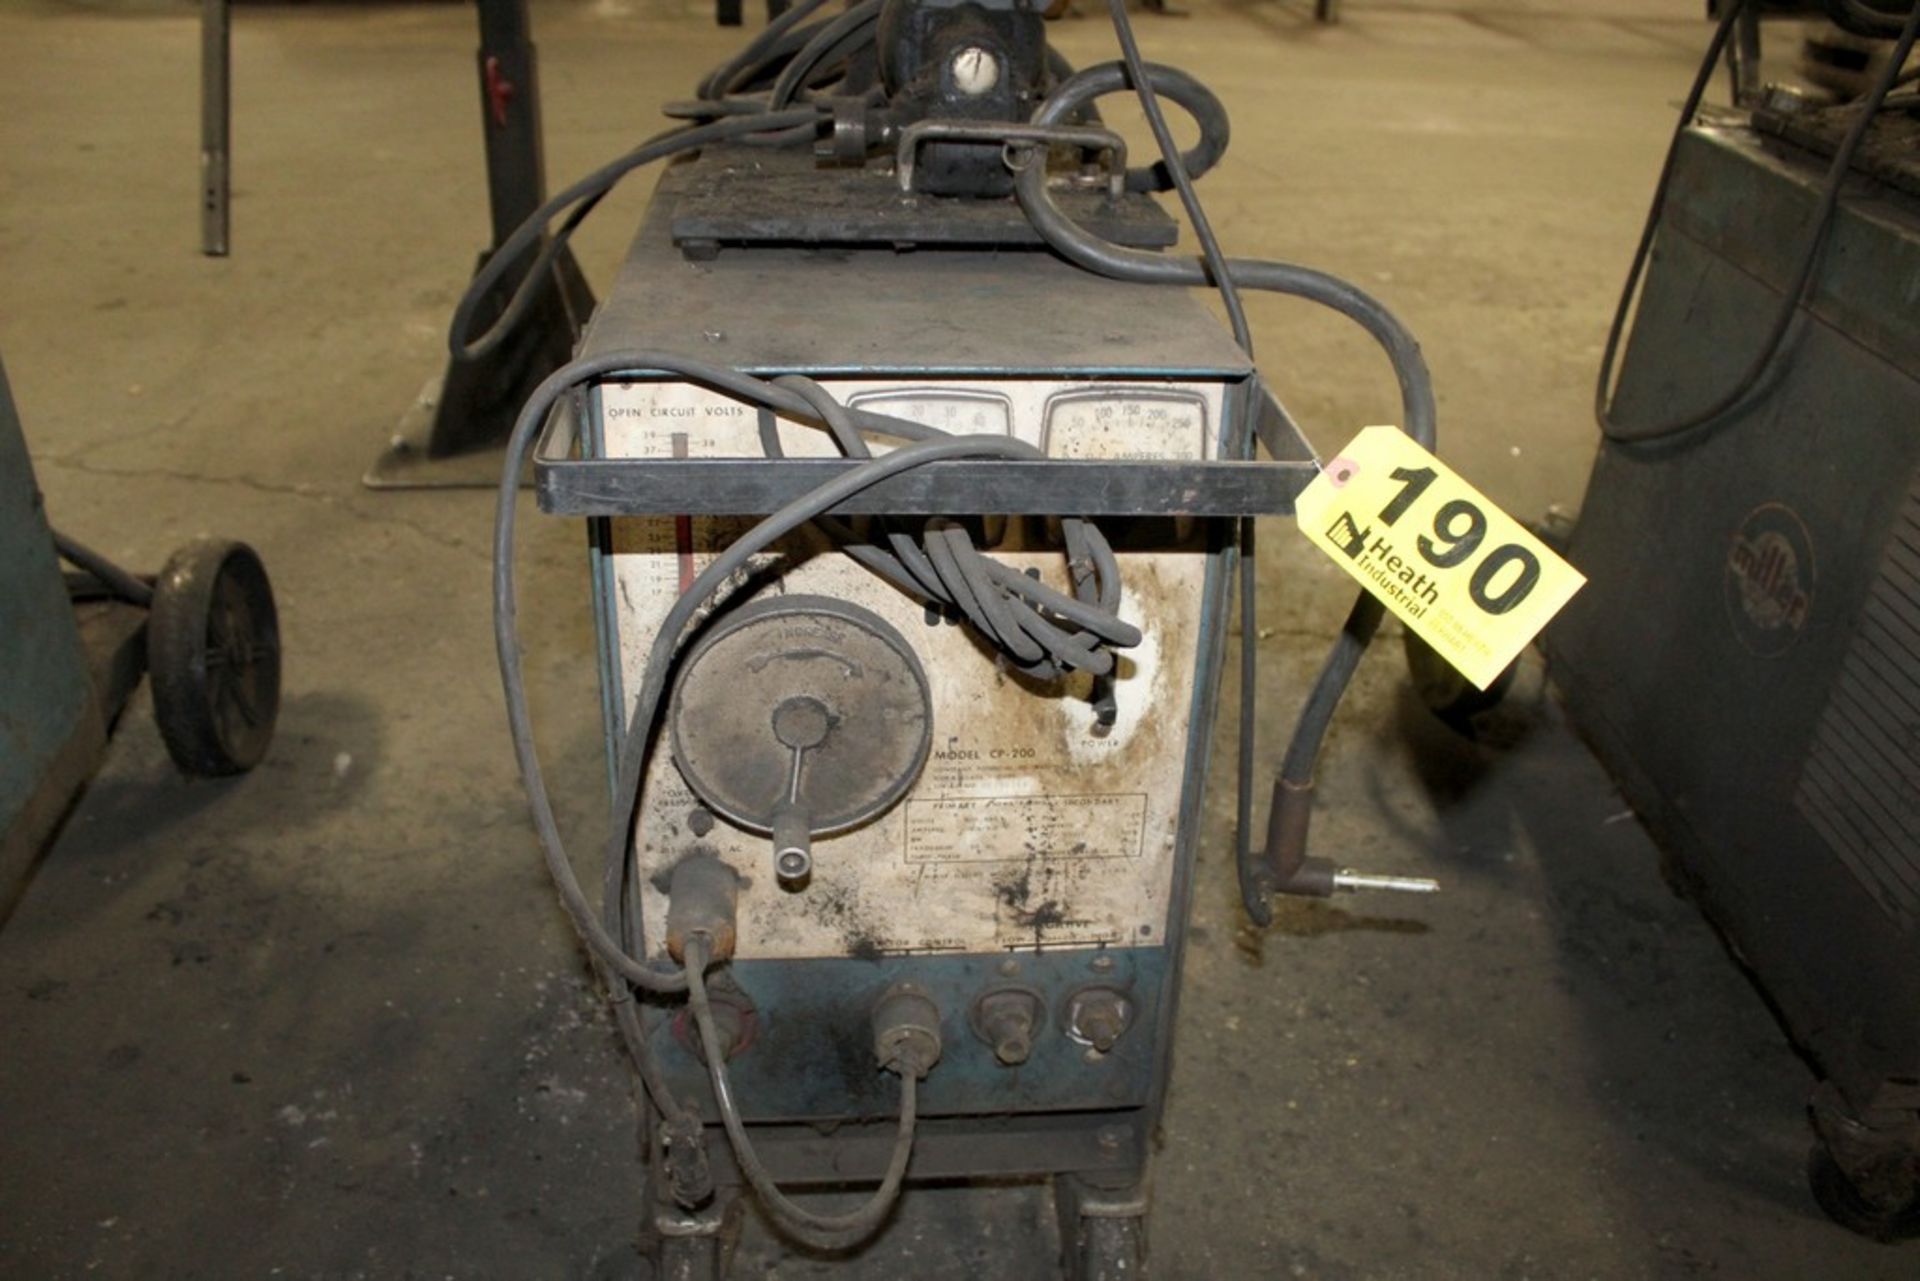 Miller CP200 Welding Power Source with Millermatic Model 10E Wire Feed, Serial Number: HE788118 - Image 3 of 4